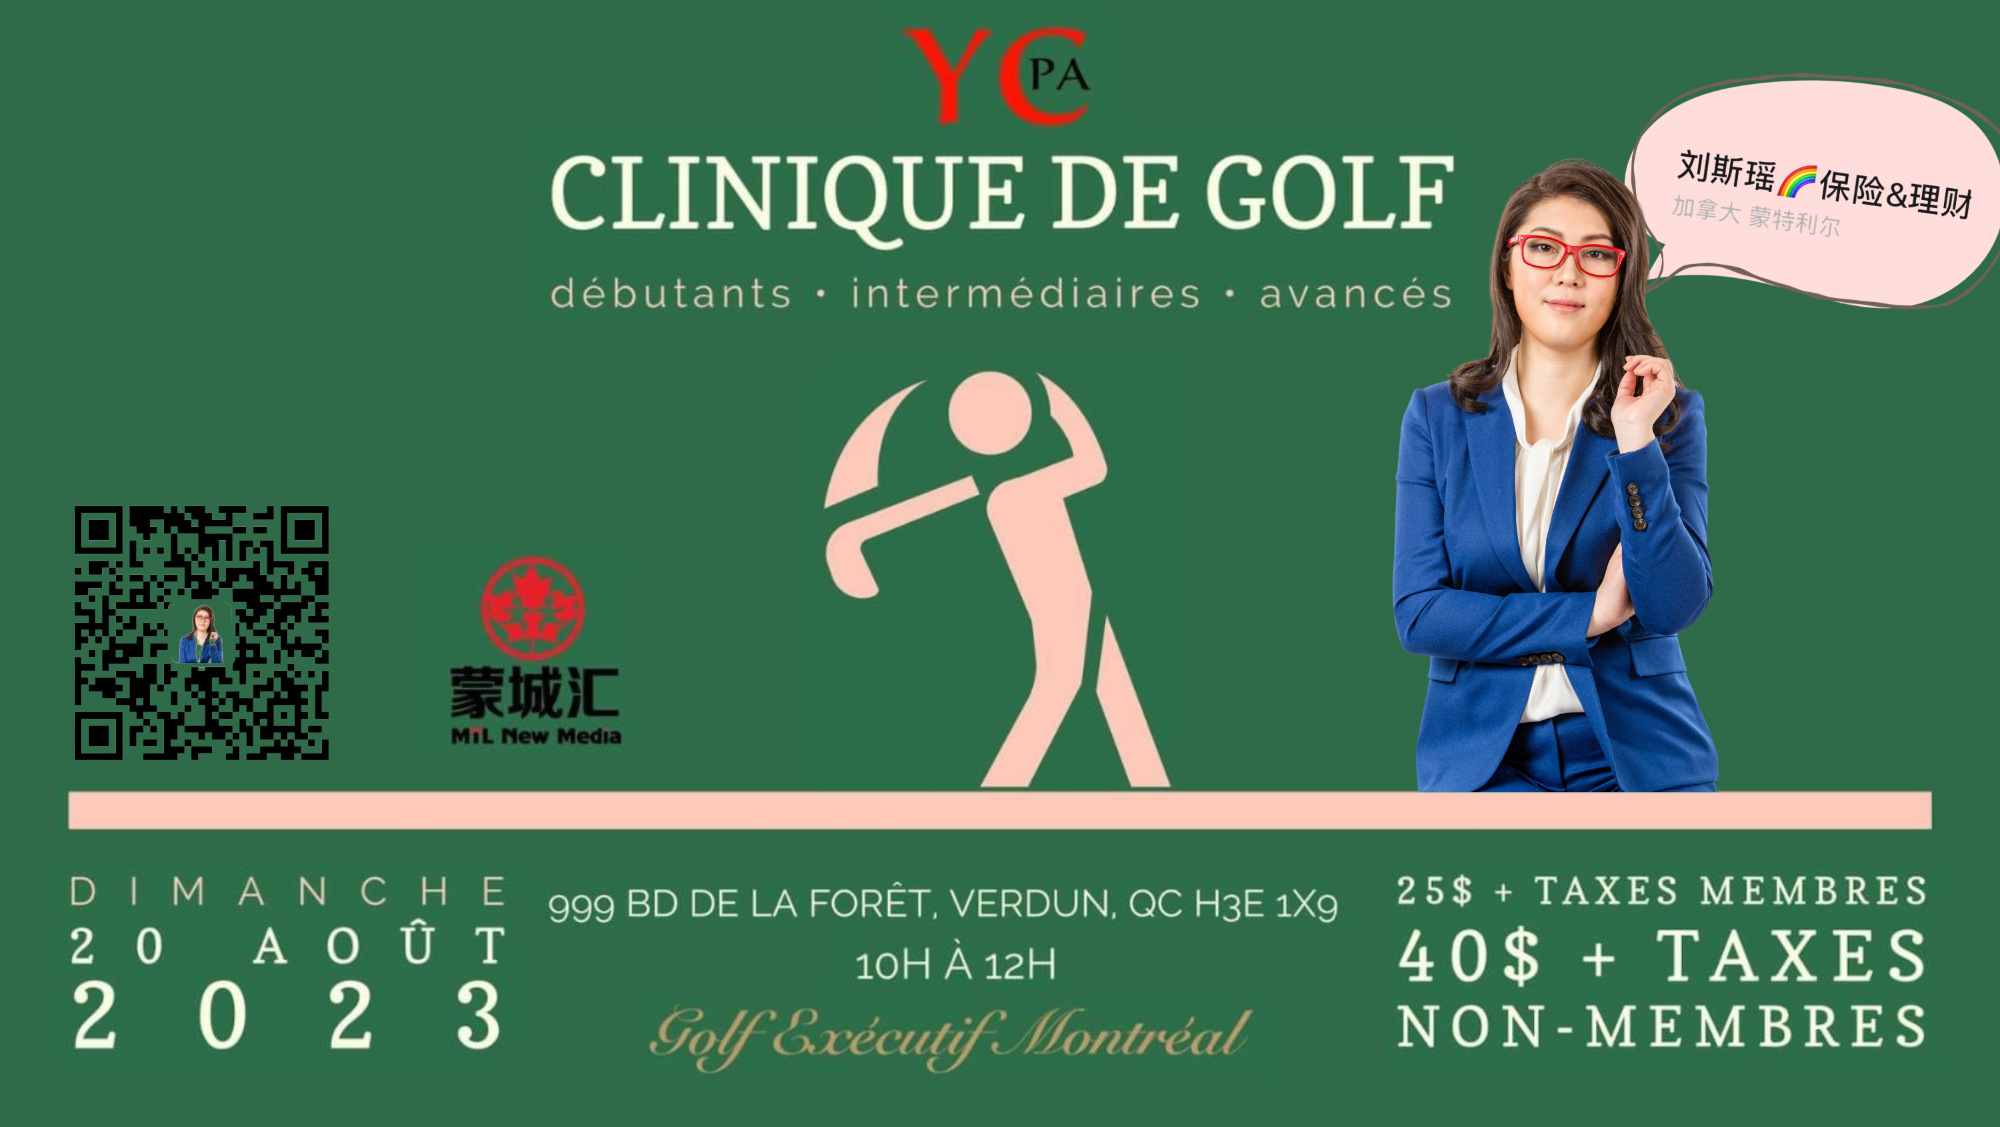 YCPACTIVE - GOLF CLINIC